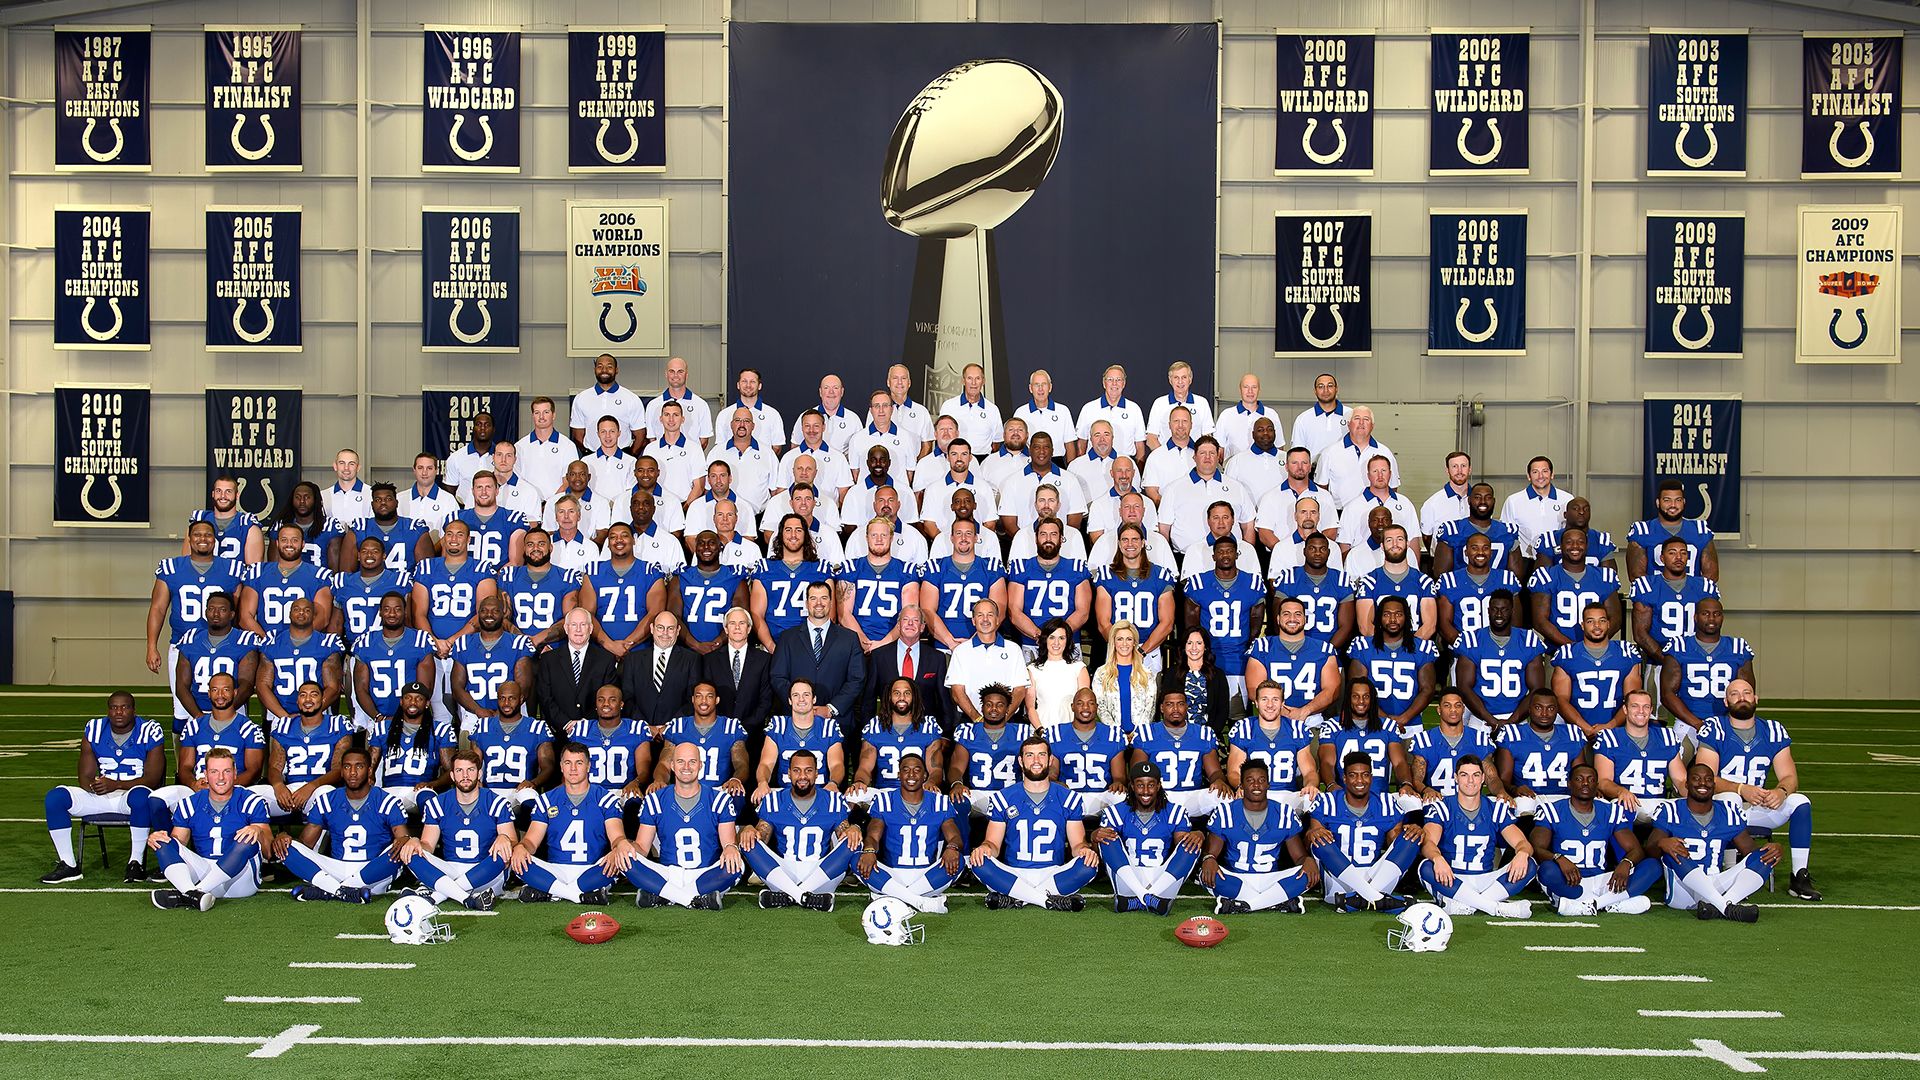 Indianapolis Colts (Sports Team)